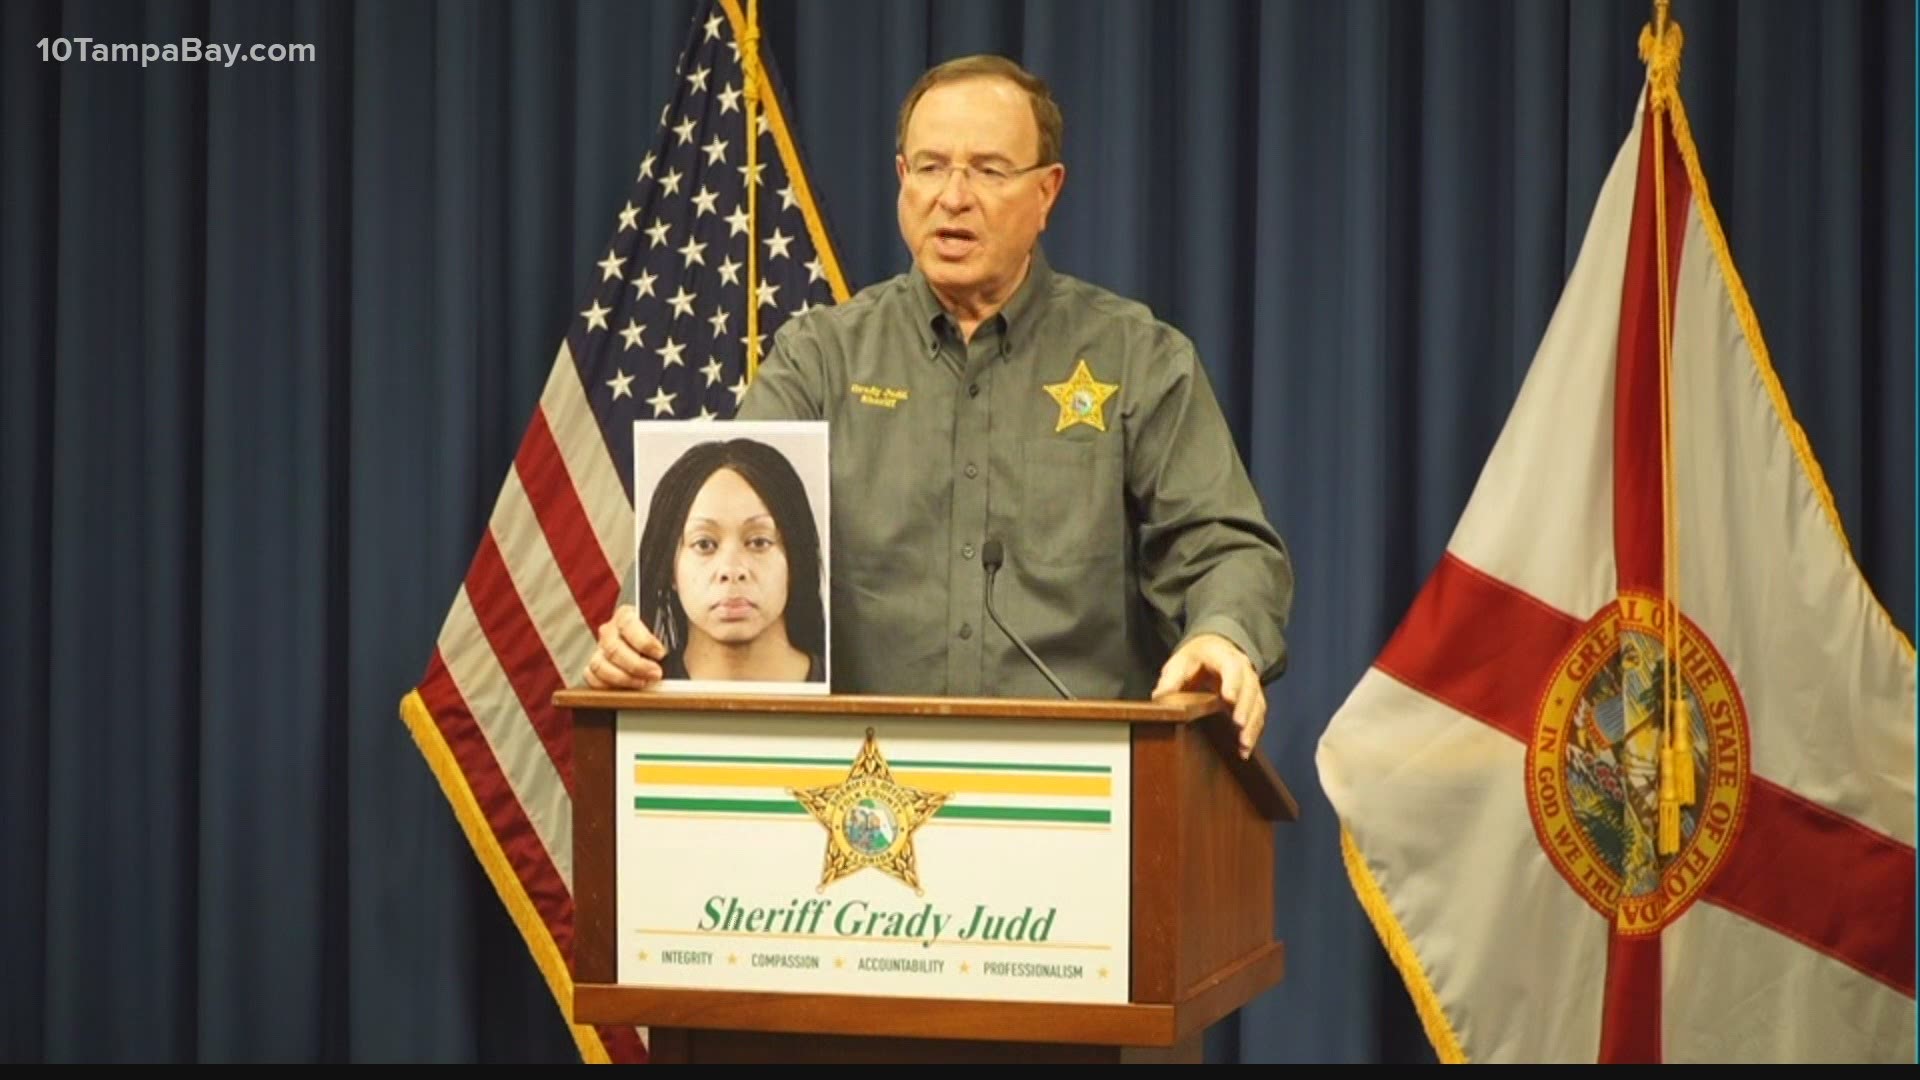 "We don't expect this kind of behavior from anyone, but especially someone in public office," Polk County Sheriff Grady Judd said.